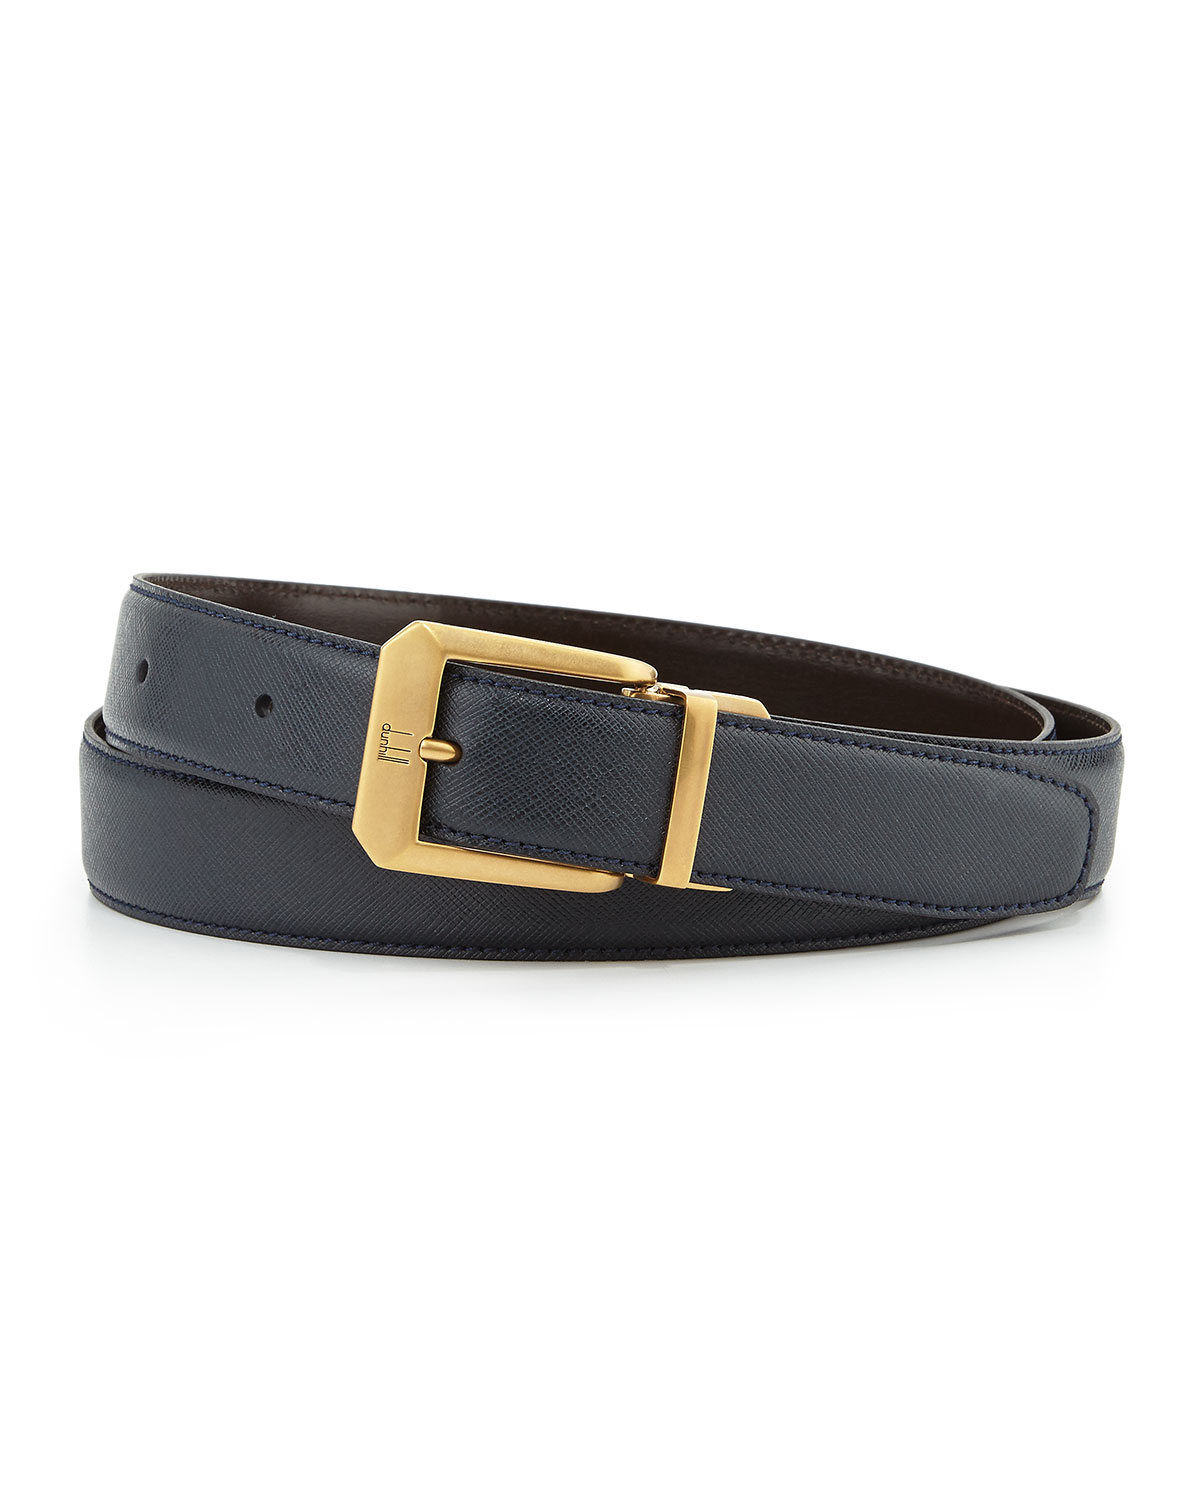 mens black leather belt with gold buckle